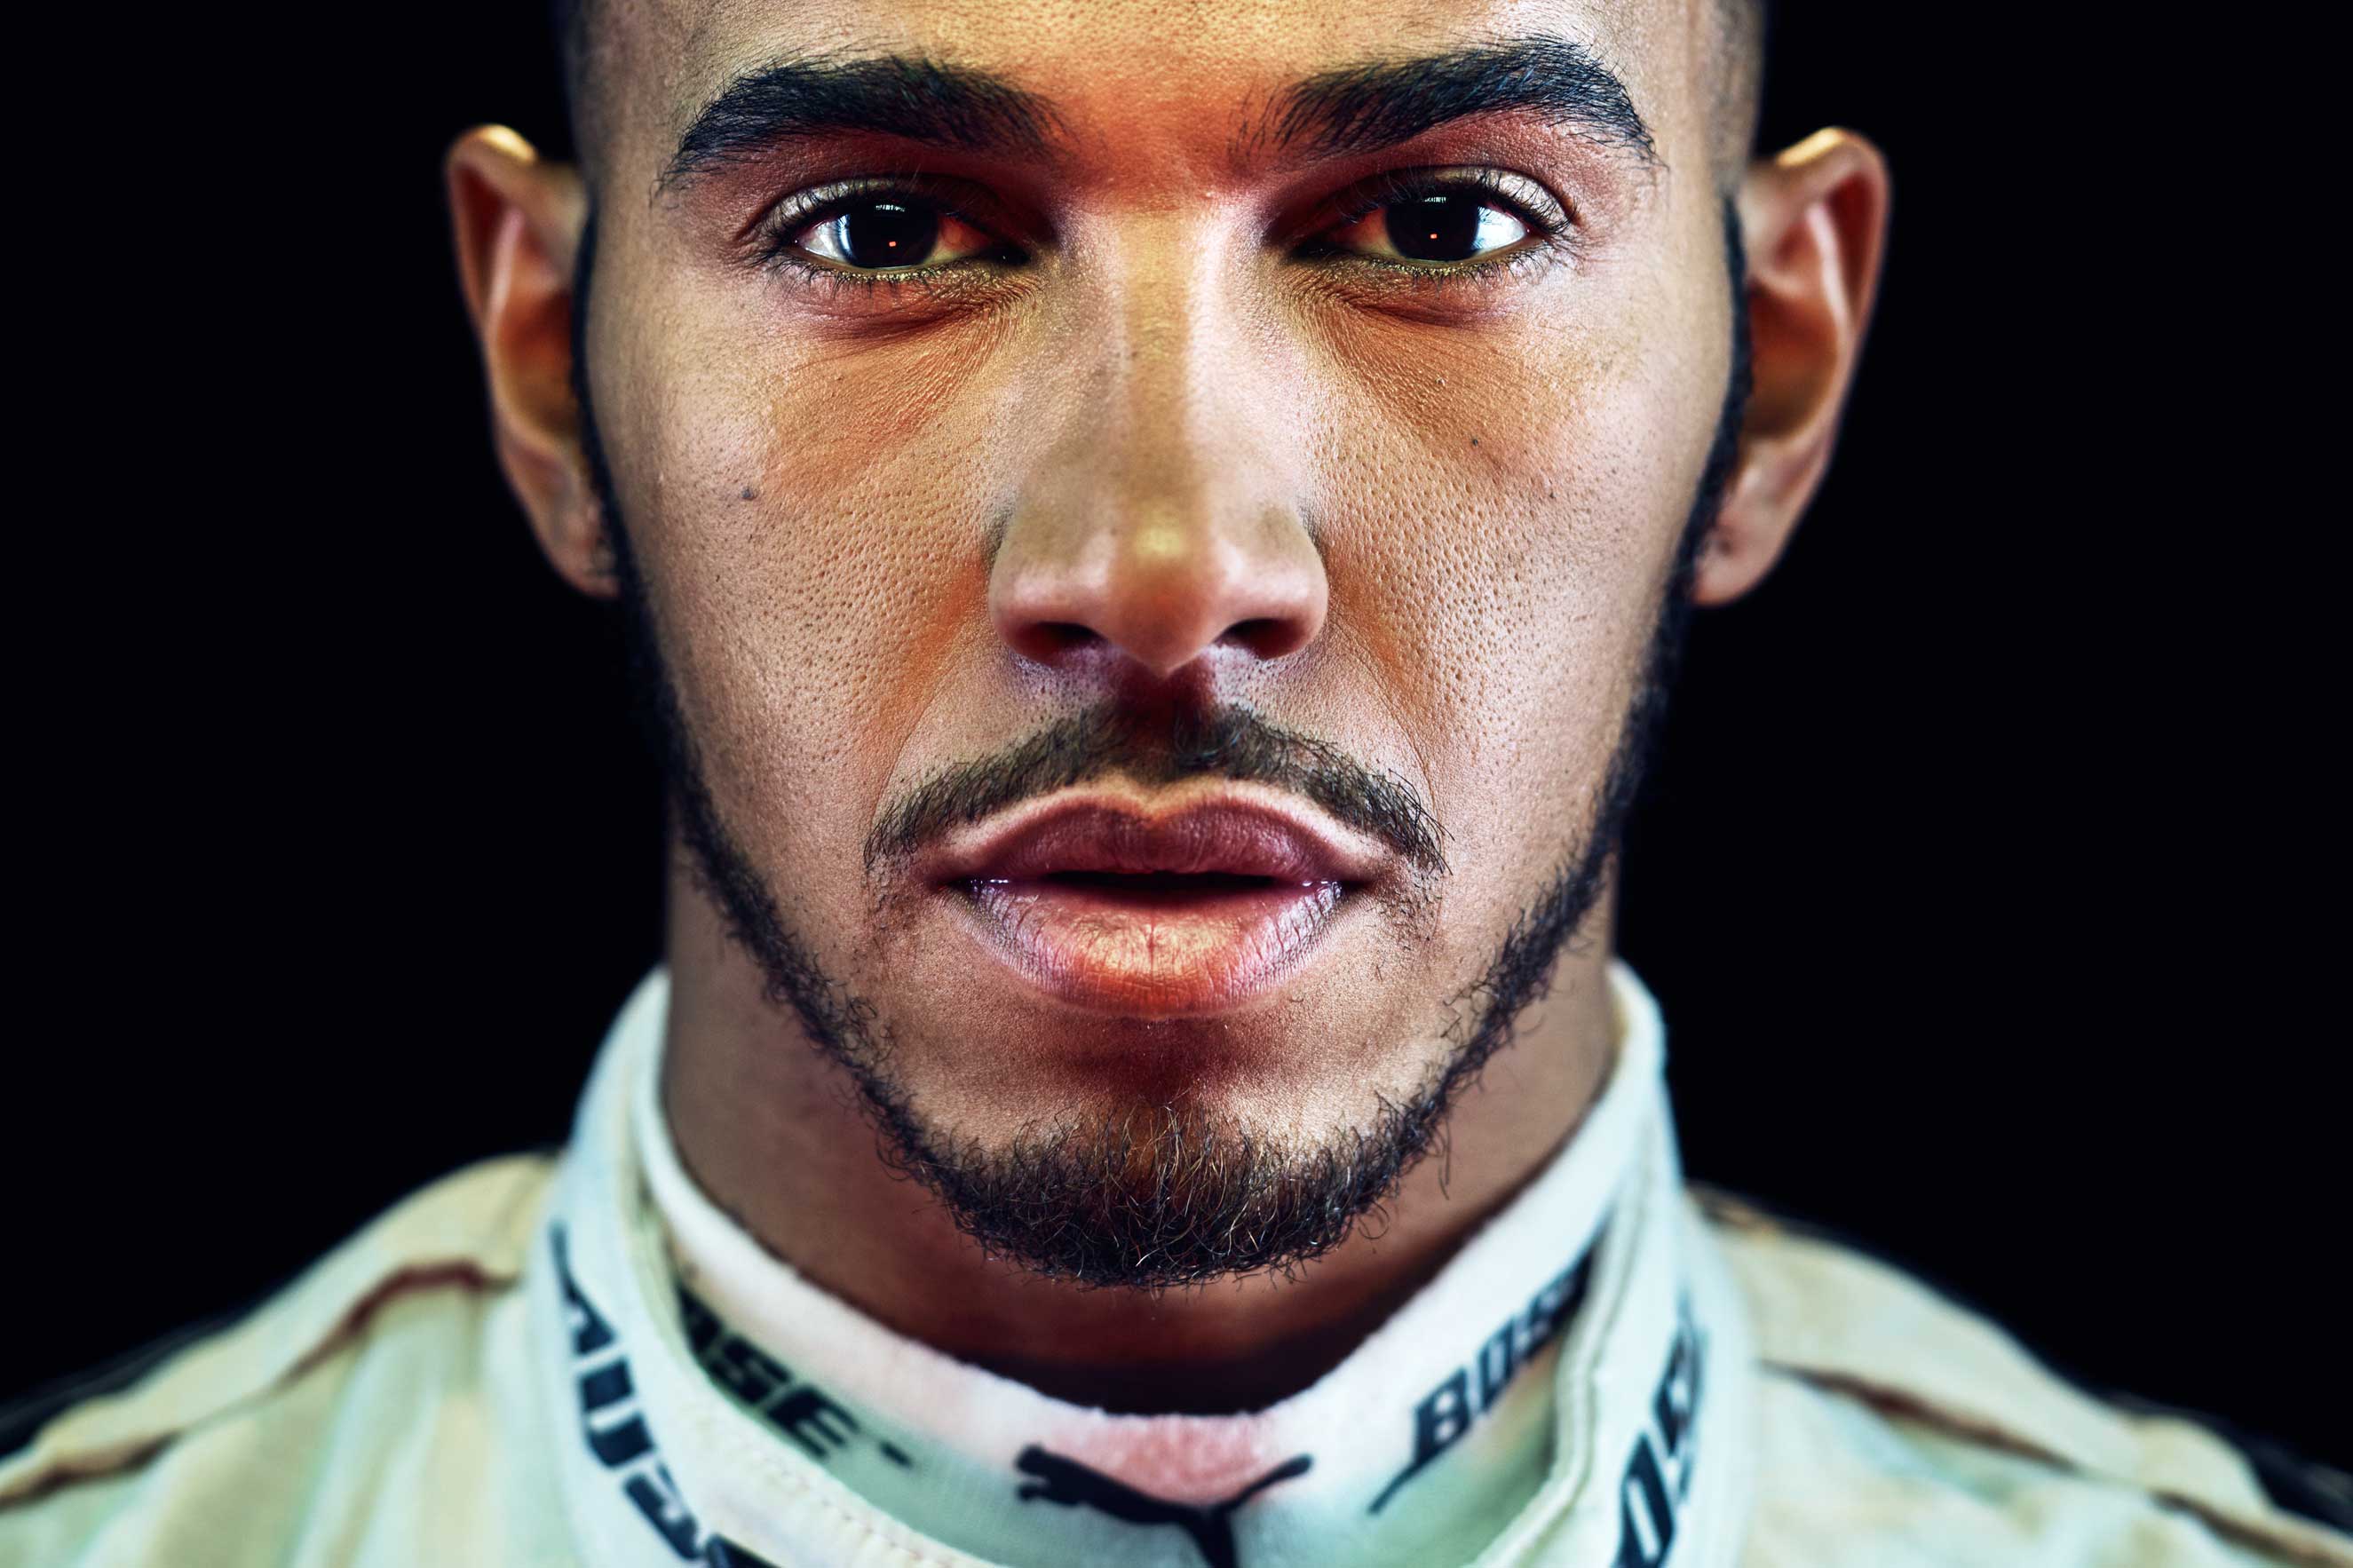 British Formula One racing driver Lewis Hamilton poses for a portrait at the TIME photo studio in New York City on Tuesday, Nov 1, 2016. (Thomas Prior for TIME)